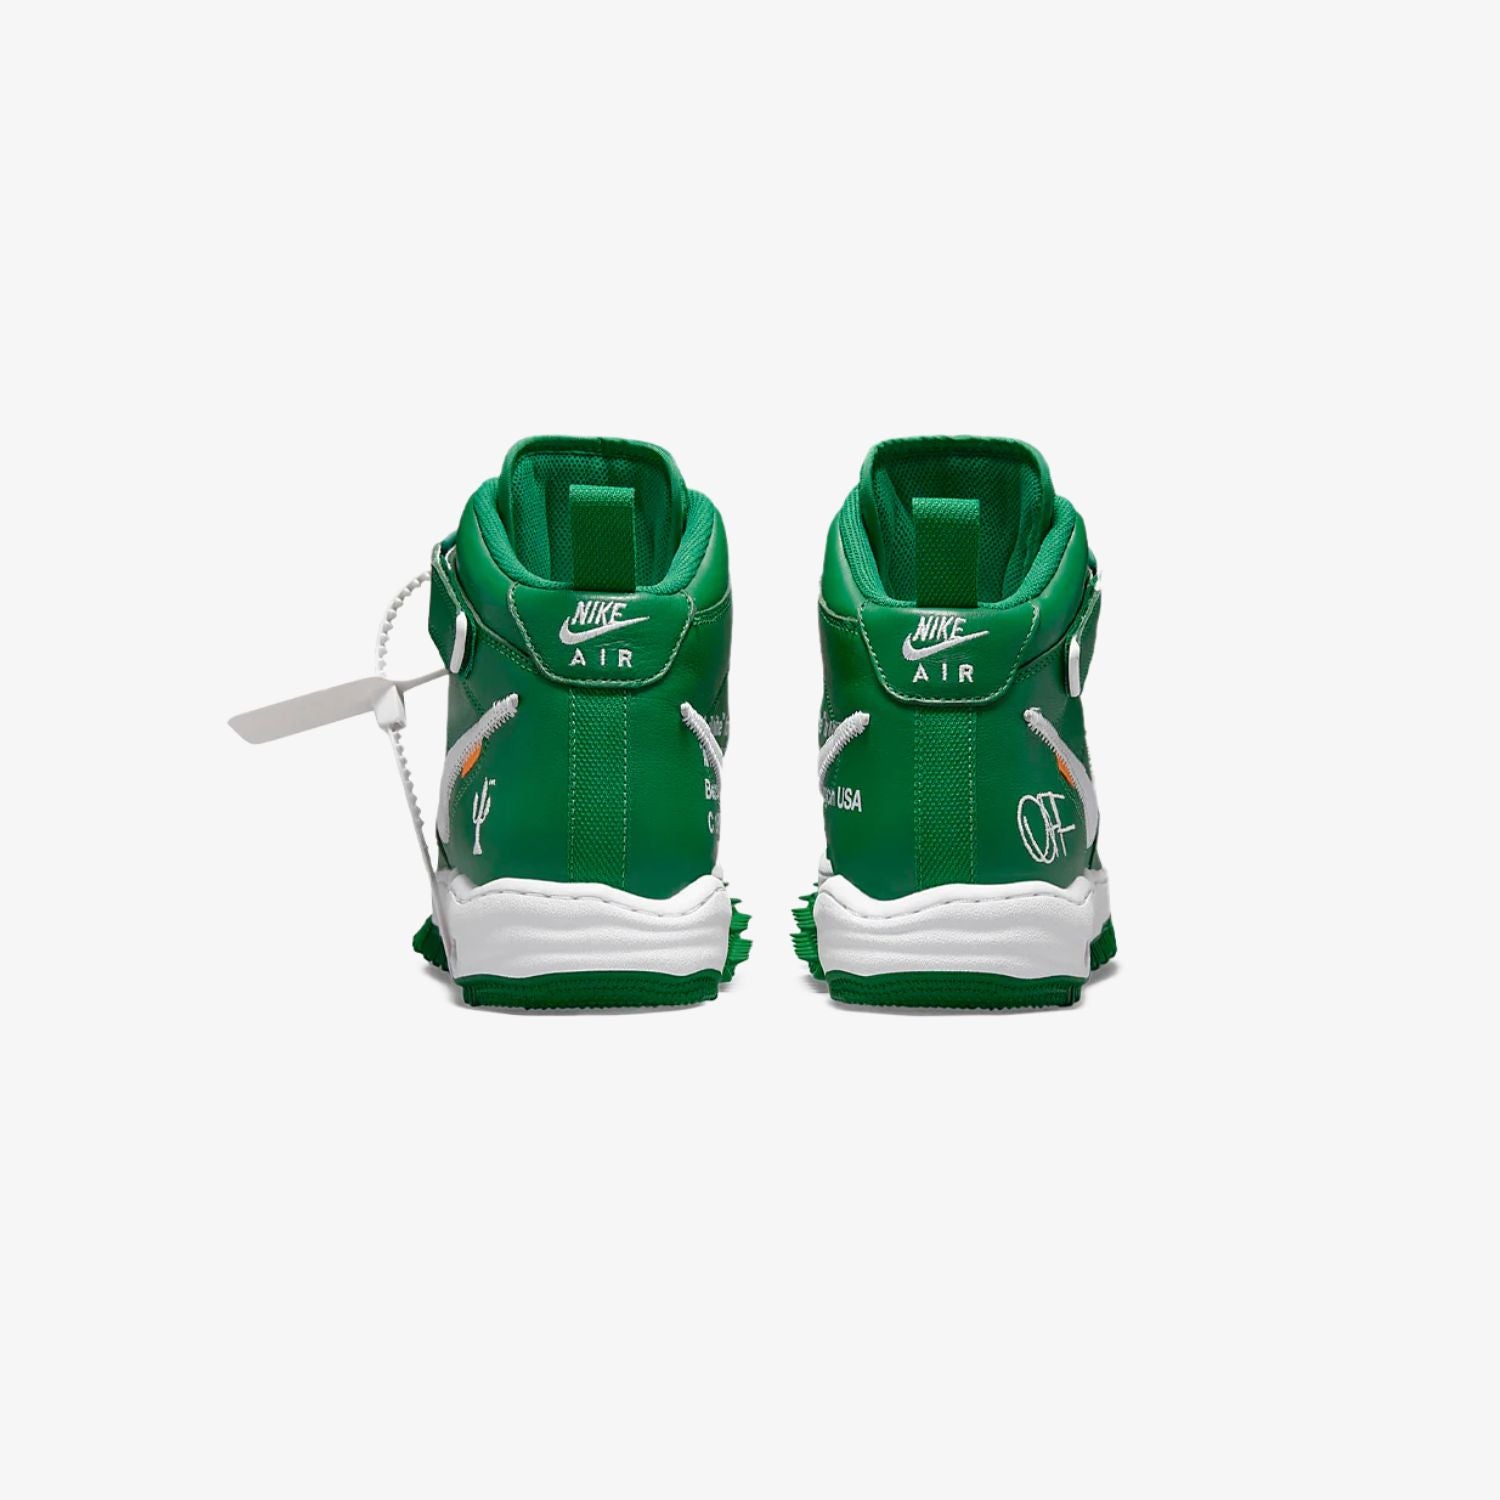 off-white-nike-air-force-1-pine-green-DR0500-300-unfazed-4_1